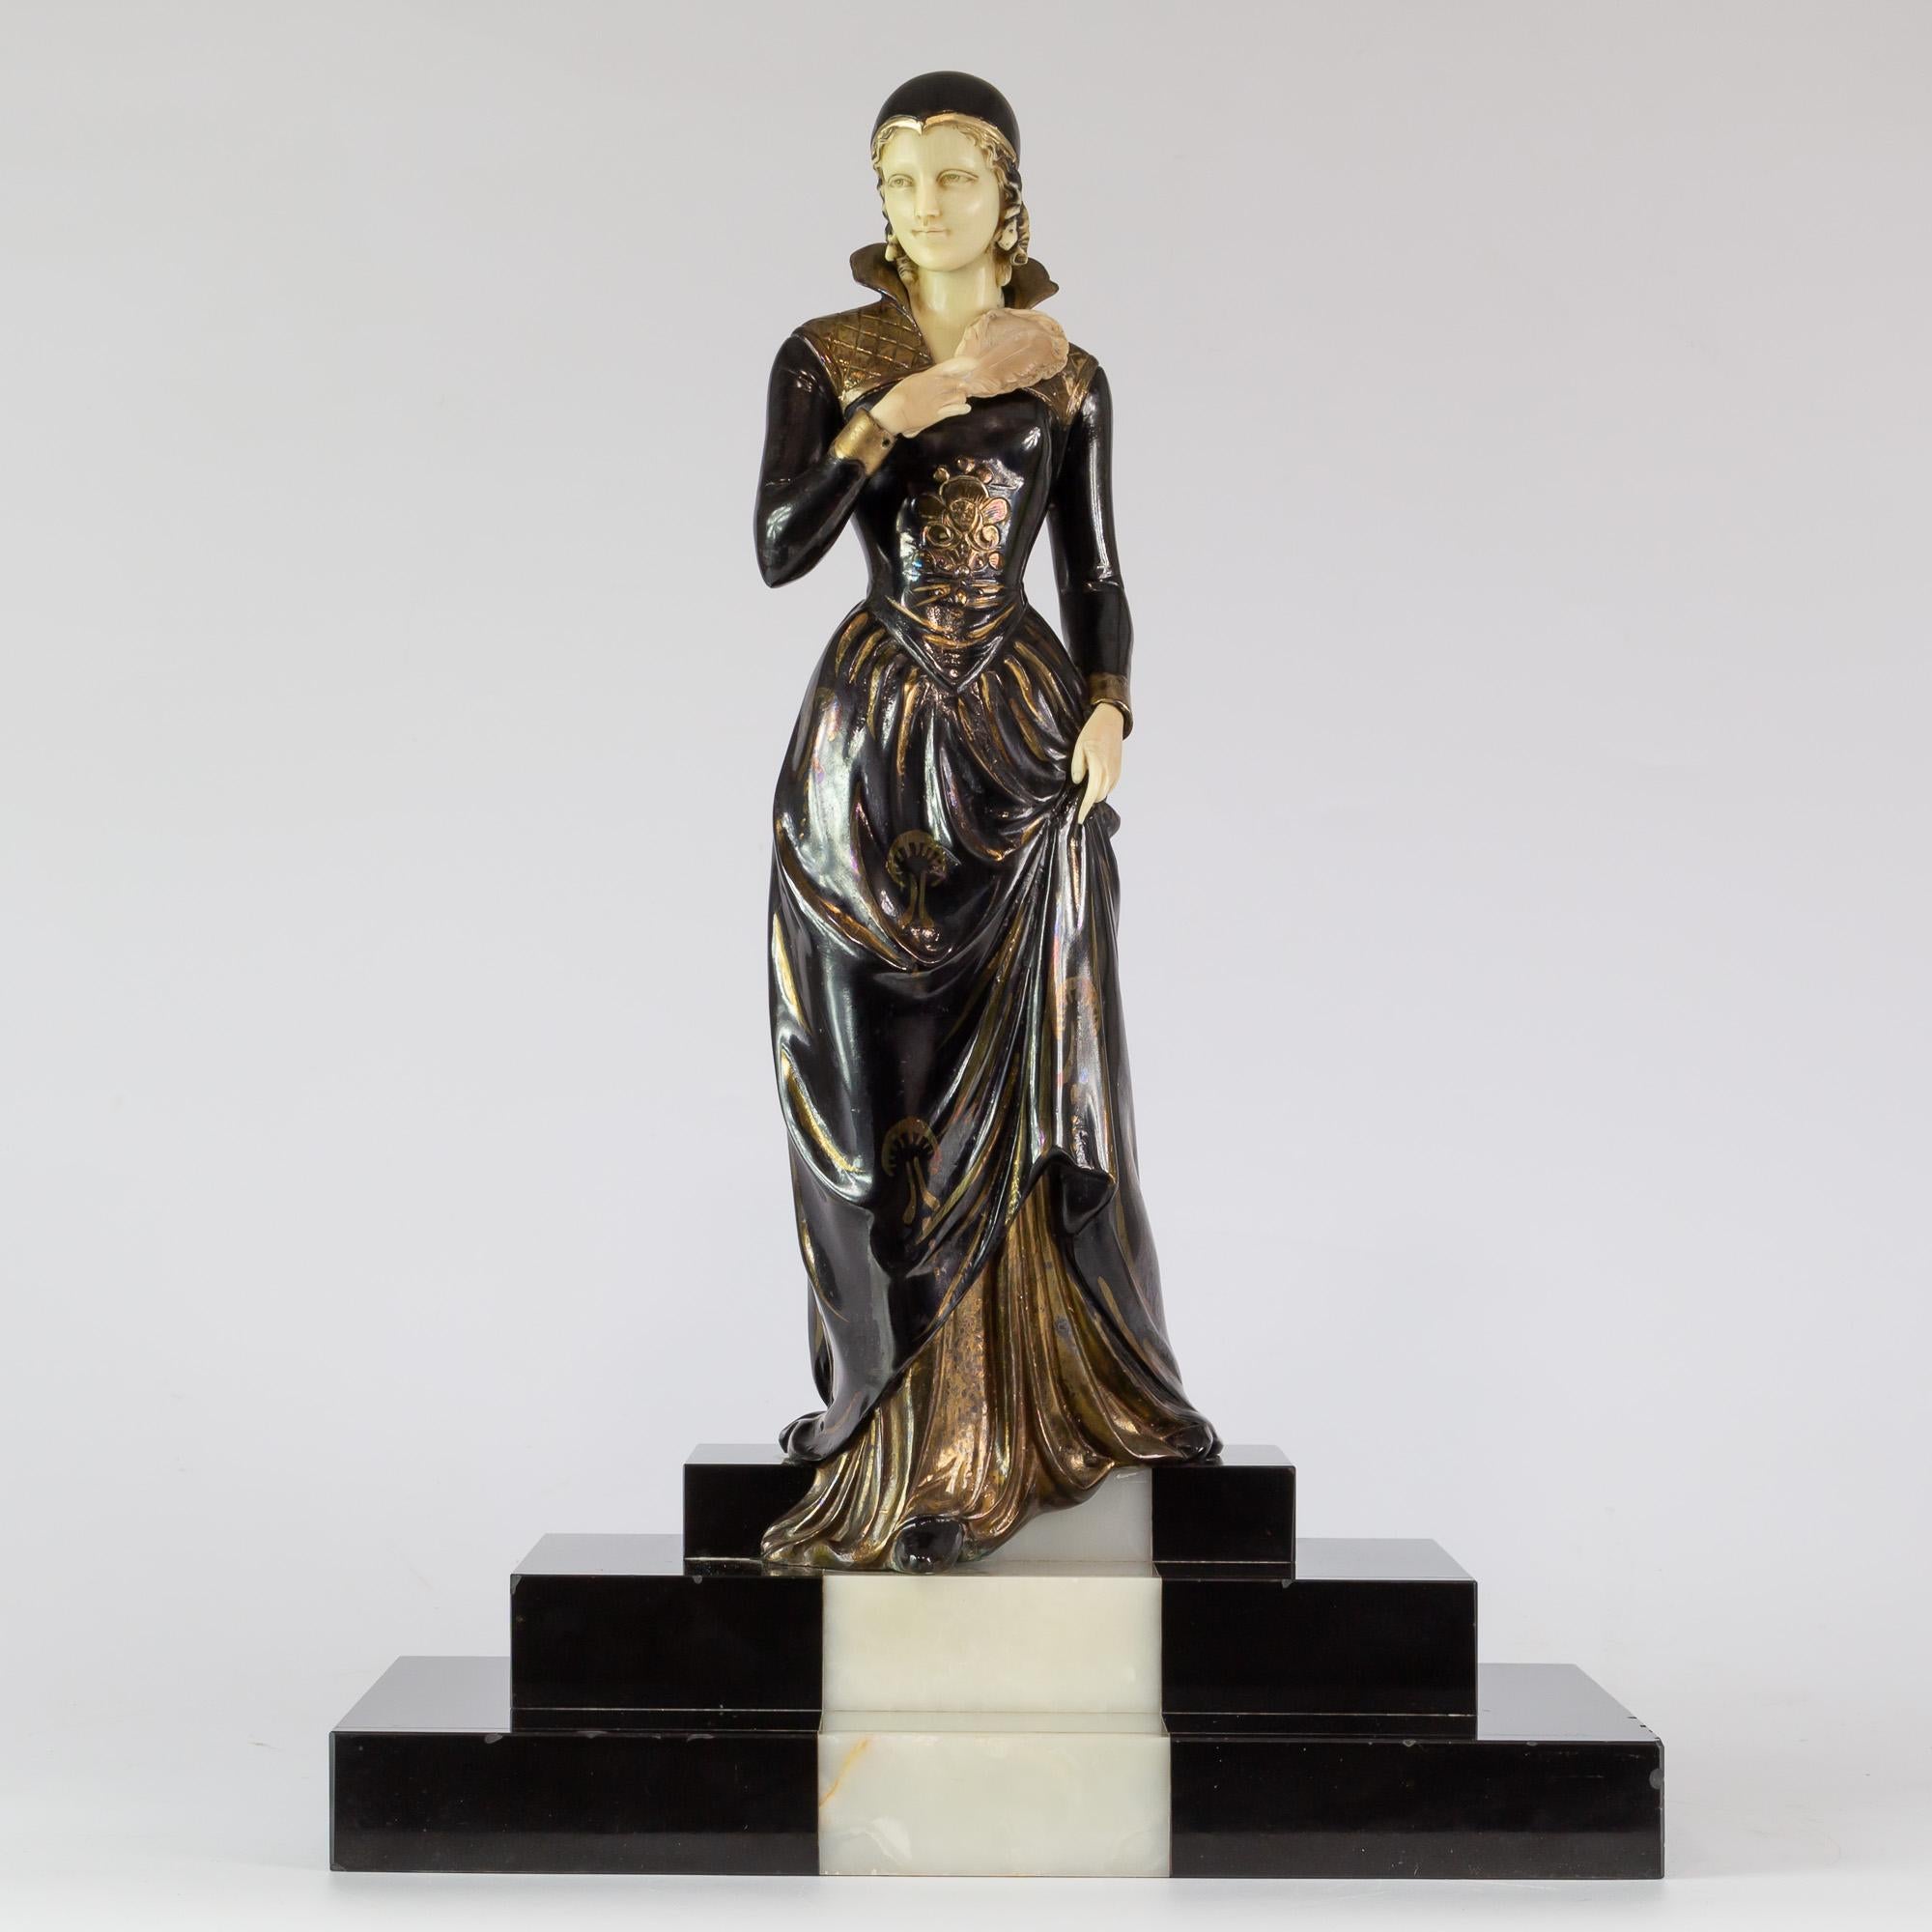 Lady figure in polychrome and gold fonte d'art with head and hands made in ivory (NOT IVORY)
Base made of Belgian marble and onyx
This piece is signed on the base by 